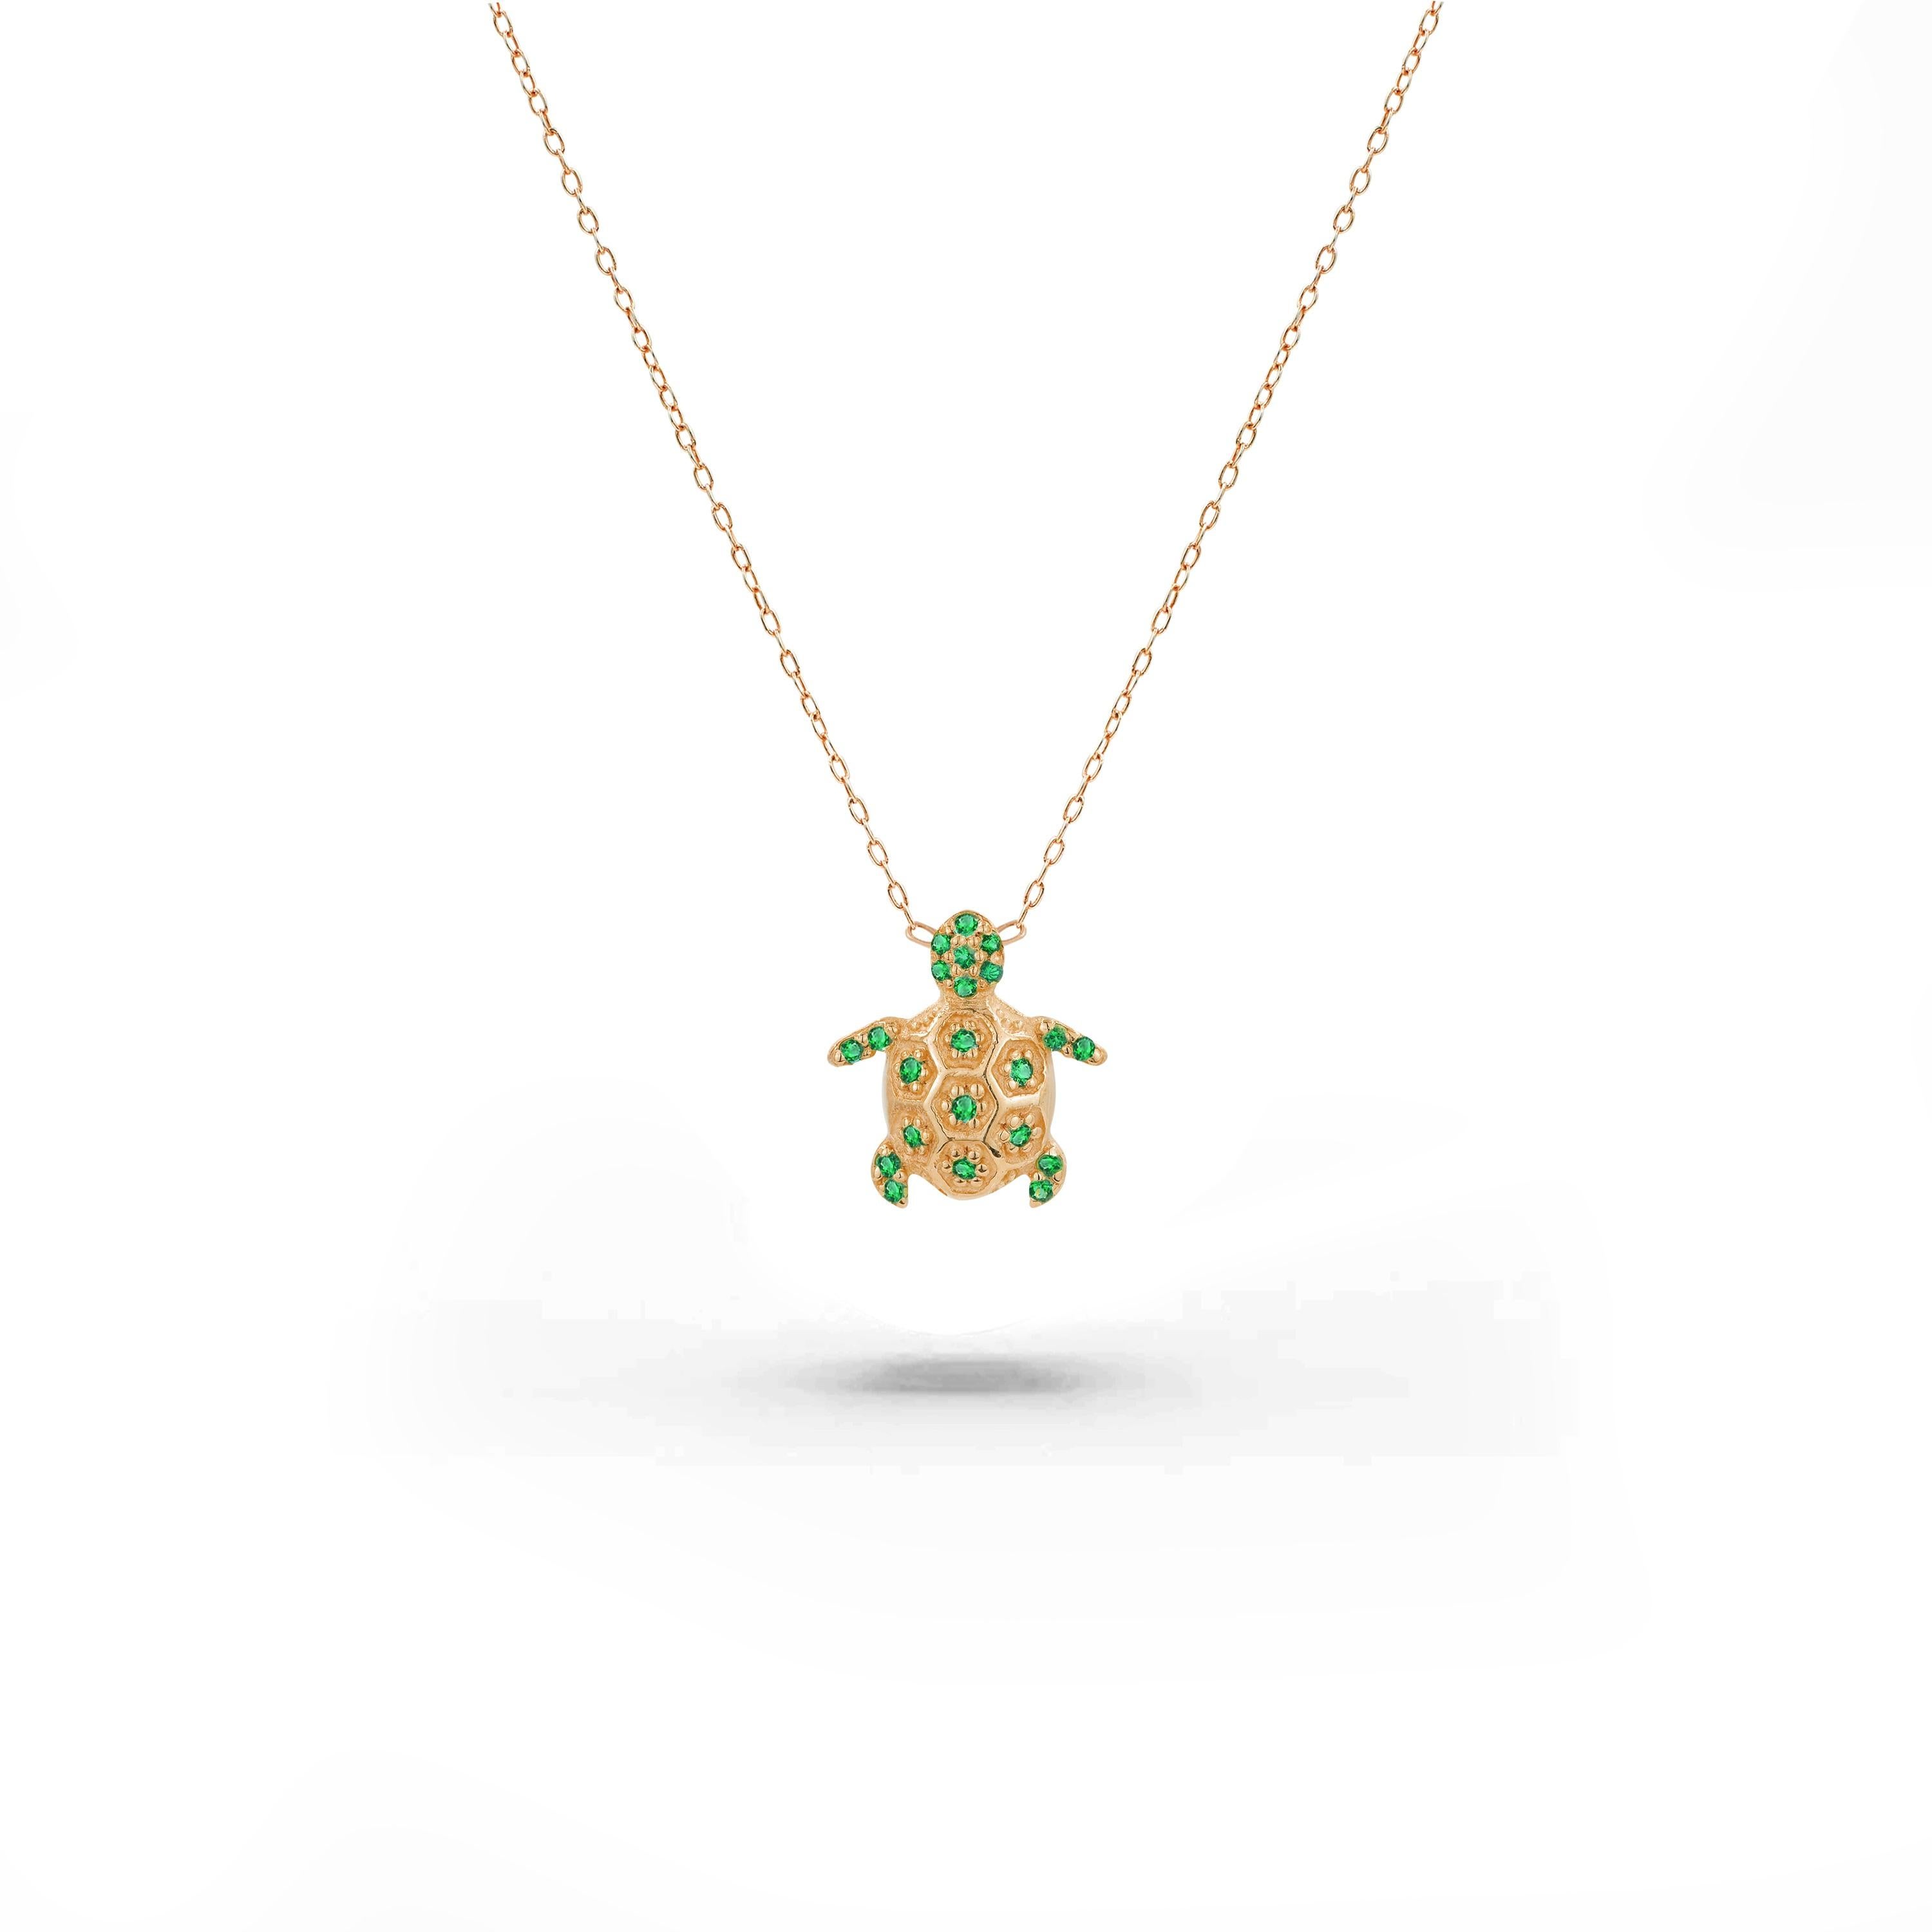 Emerald Turtle Necklace is made of 18k solid gold available in three colors, White Gold / Rose Gold / Yellow Gold.

Beautiful little minimalist necklace is adorned with natural AAA quality Emerald. Perfect for wearing by itself for a minimal